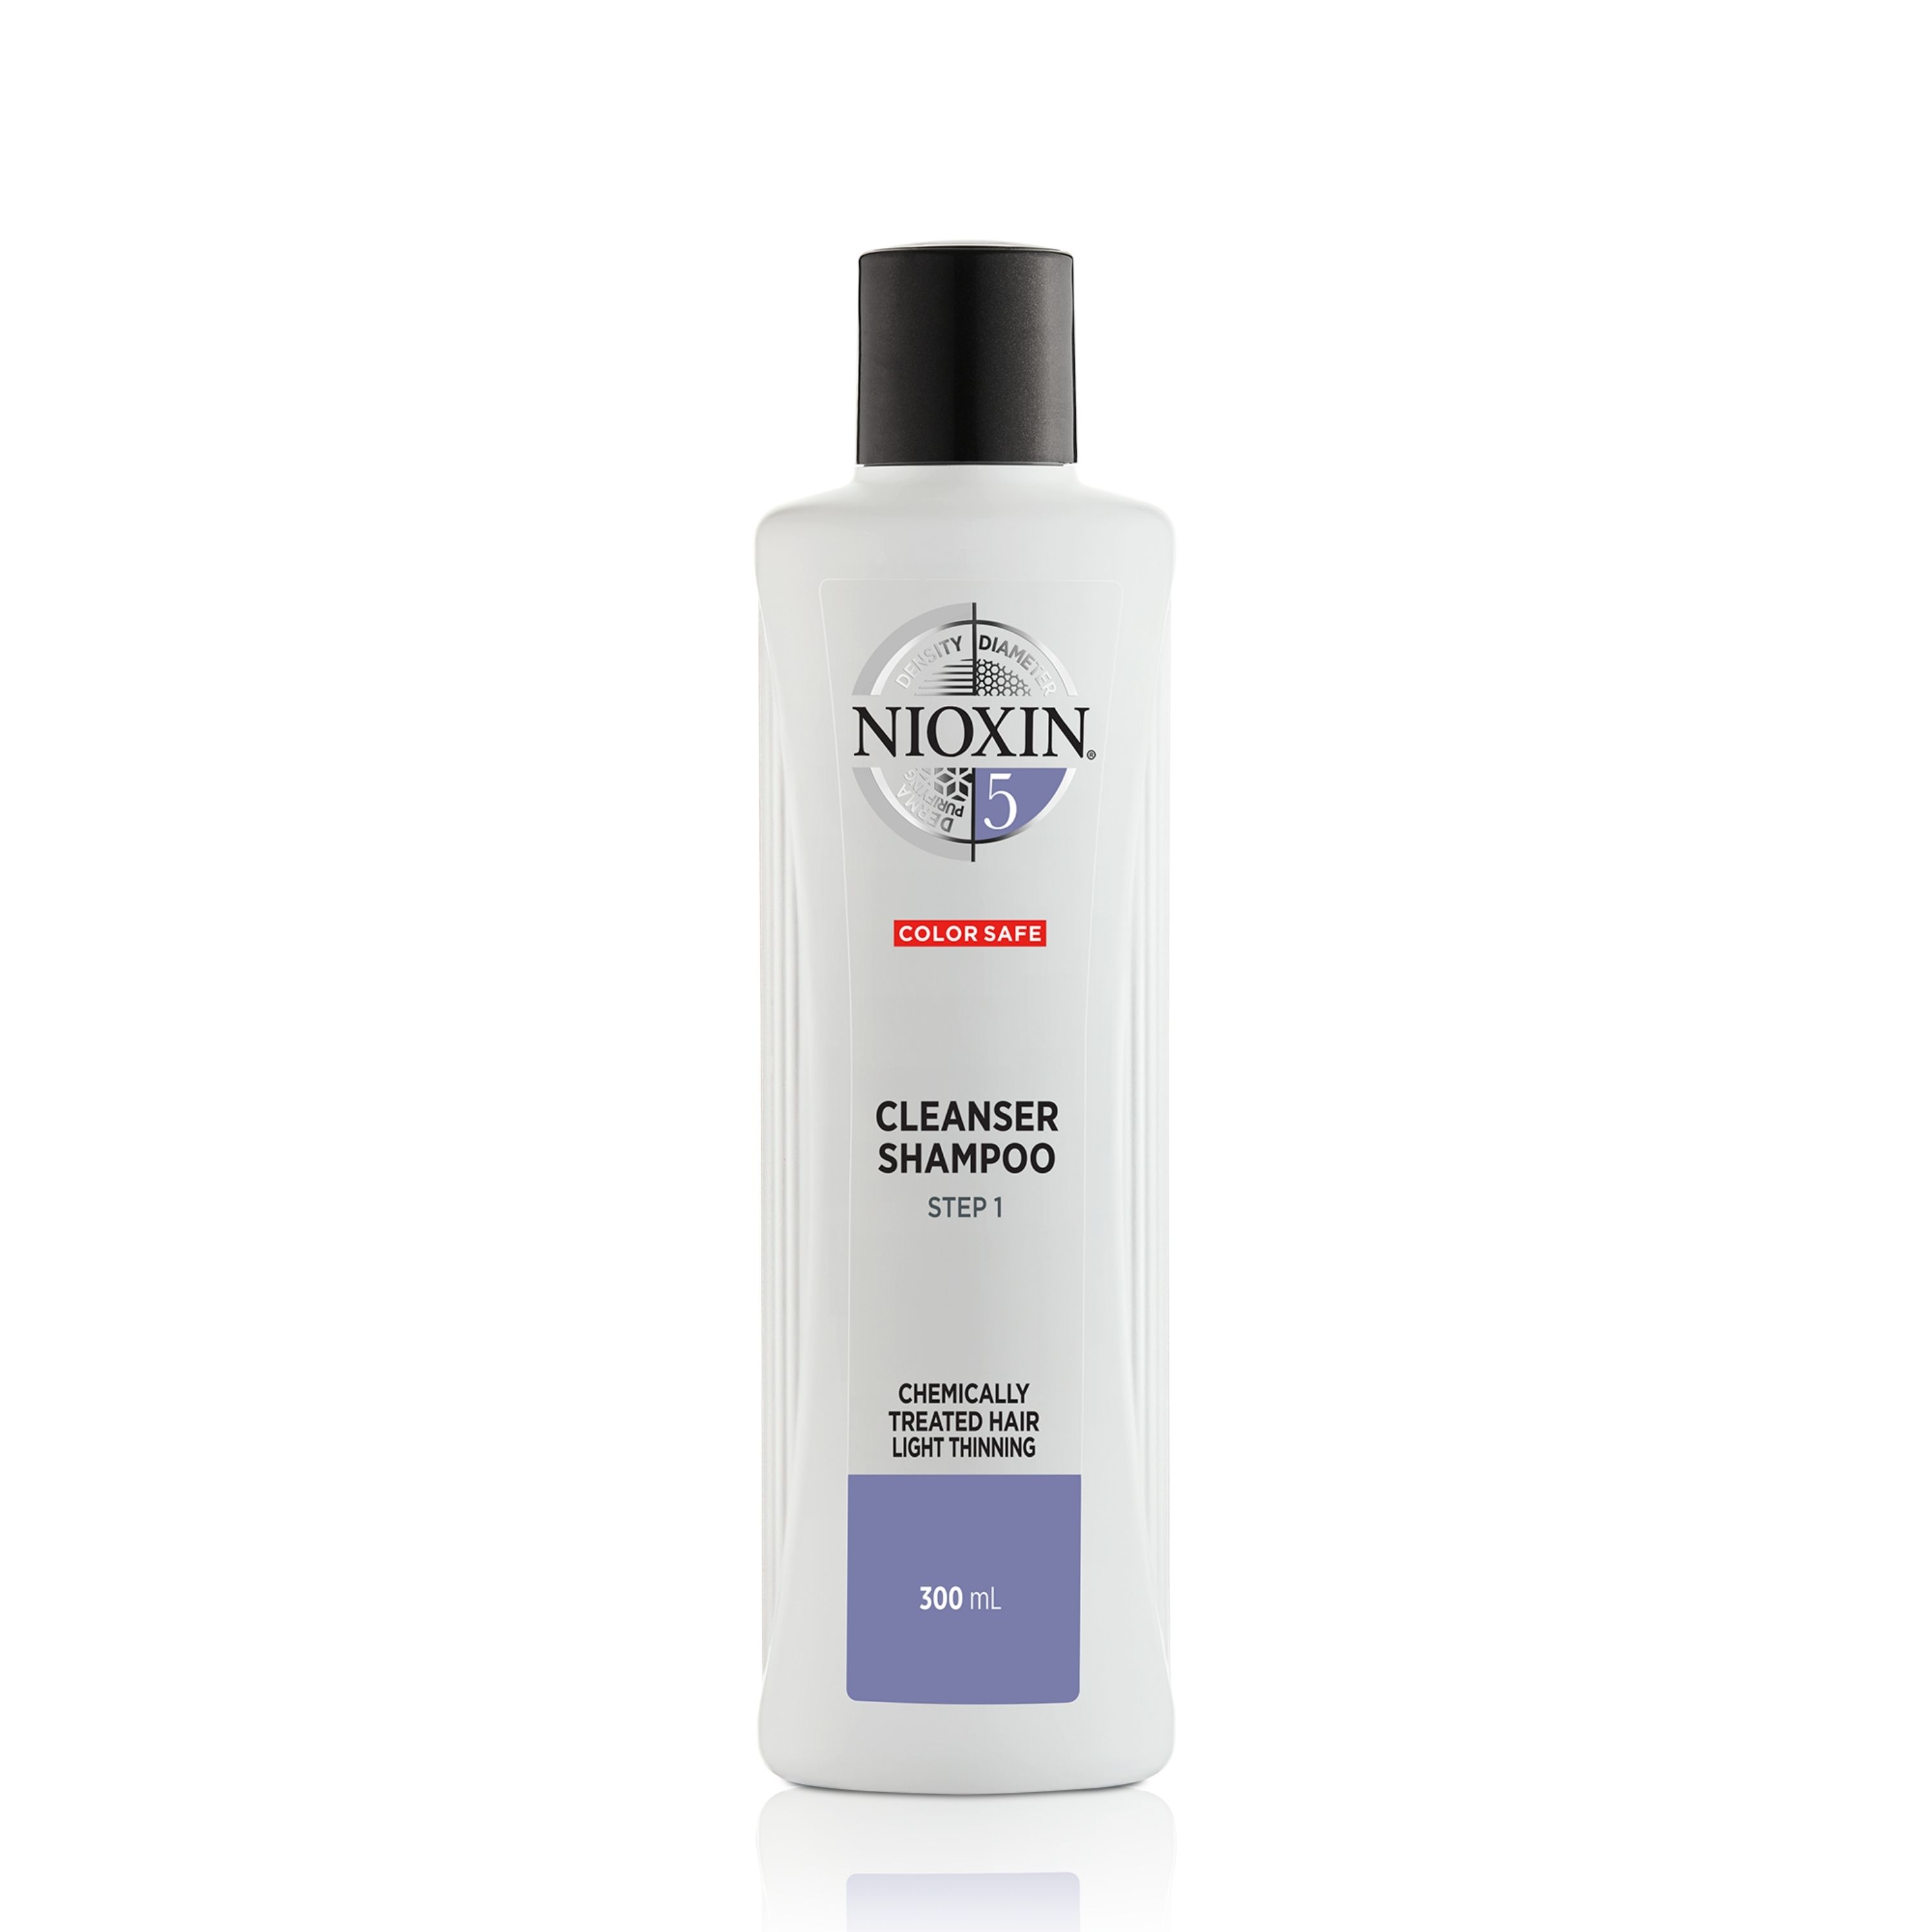 Image of Nioxin System 5 Cleanser Shampoo 300ml